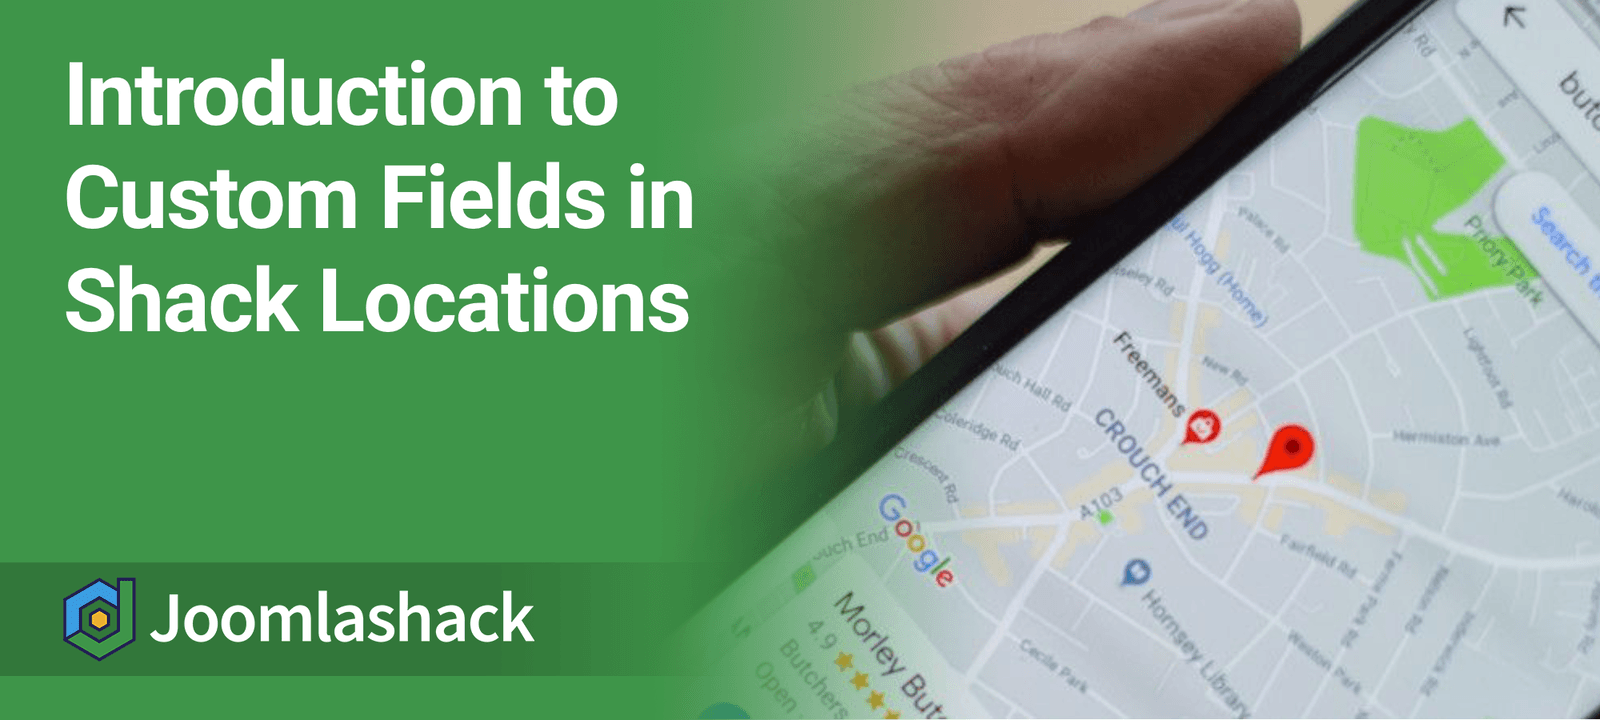 Introduction to Custom Fields in Shack Locations